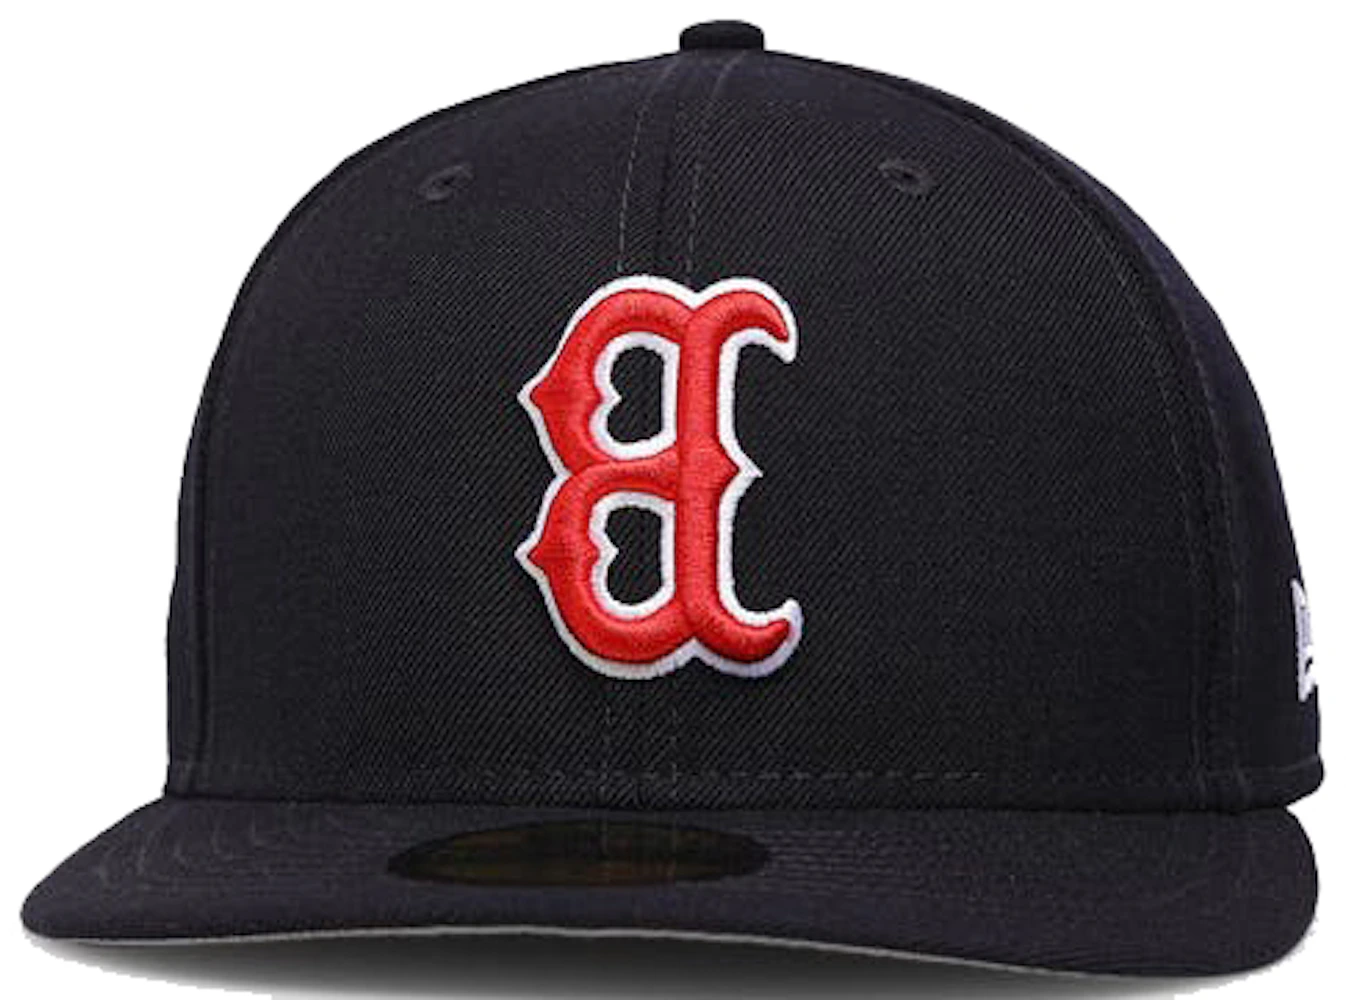 Boston Red Sox New Era All Sky Blue City Connect 59FIFTY Fitted Hat